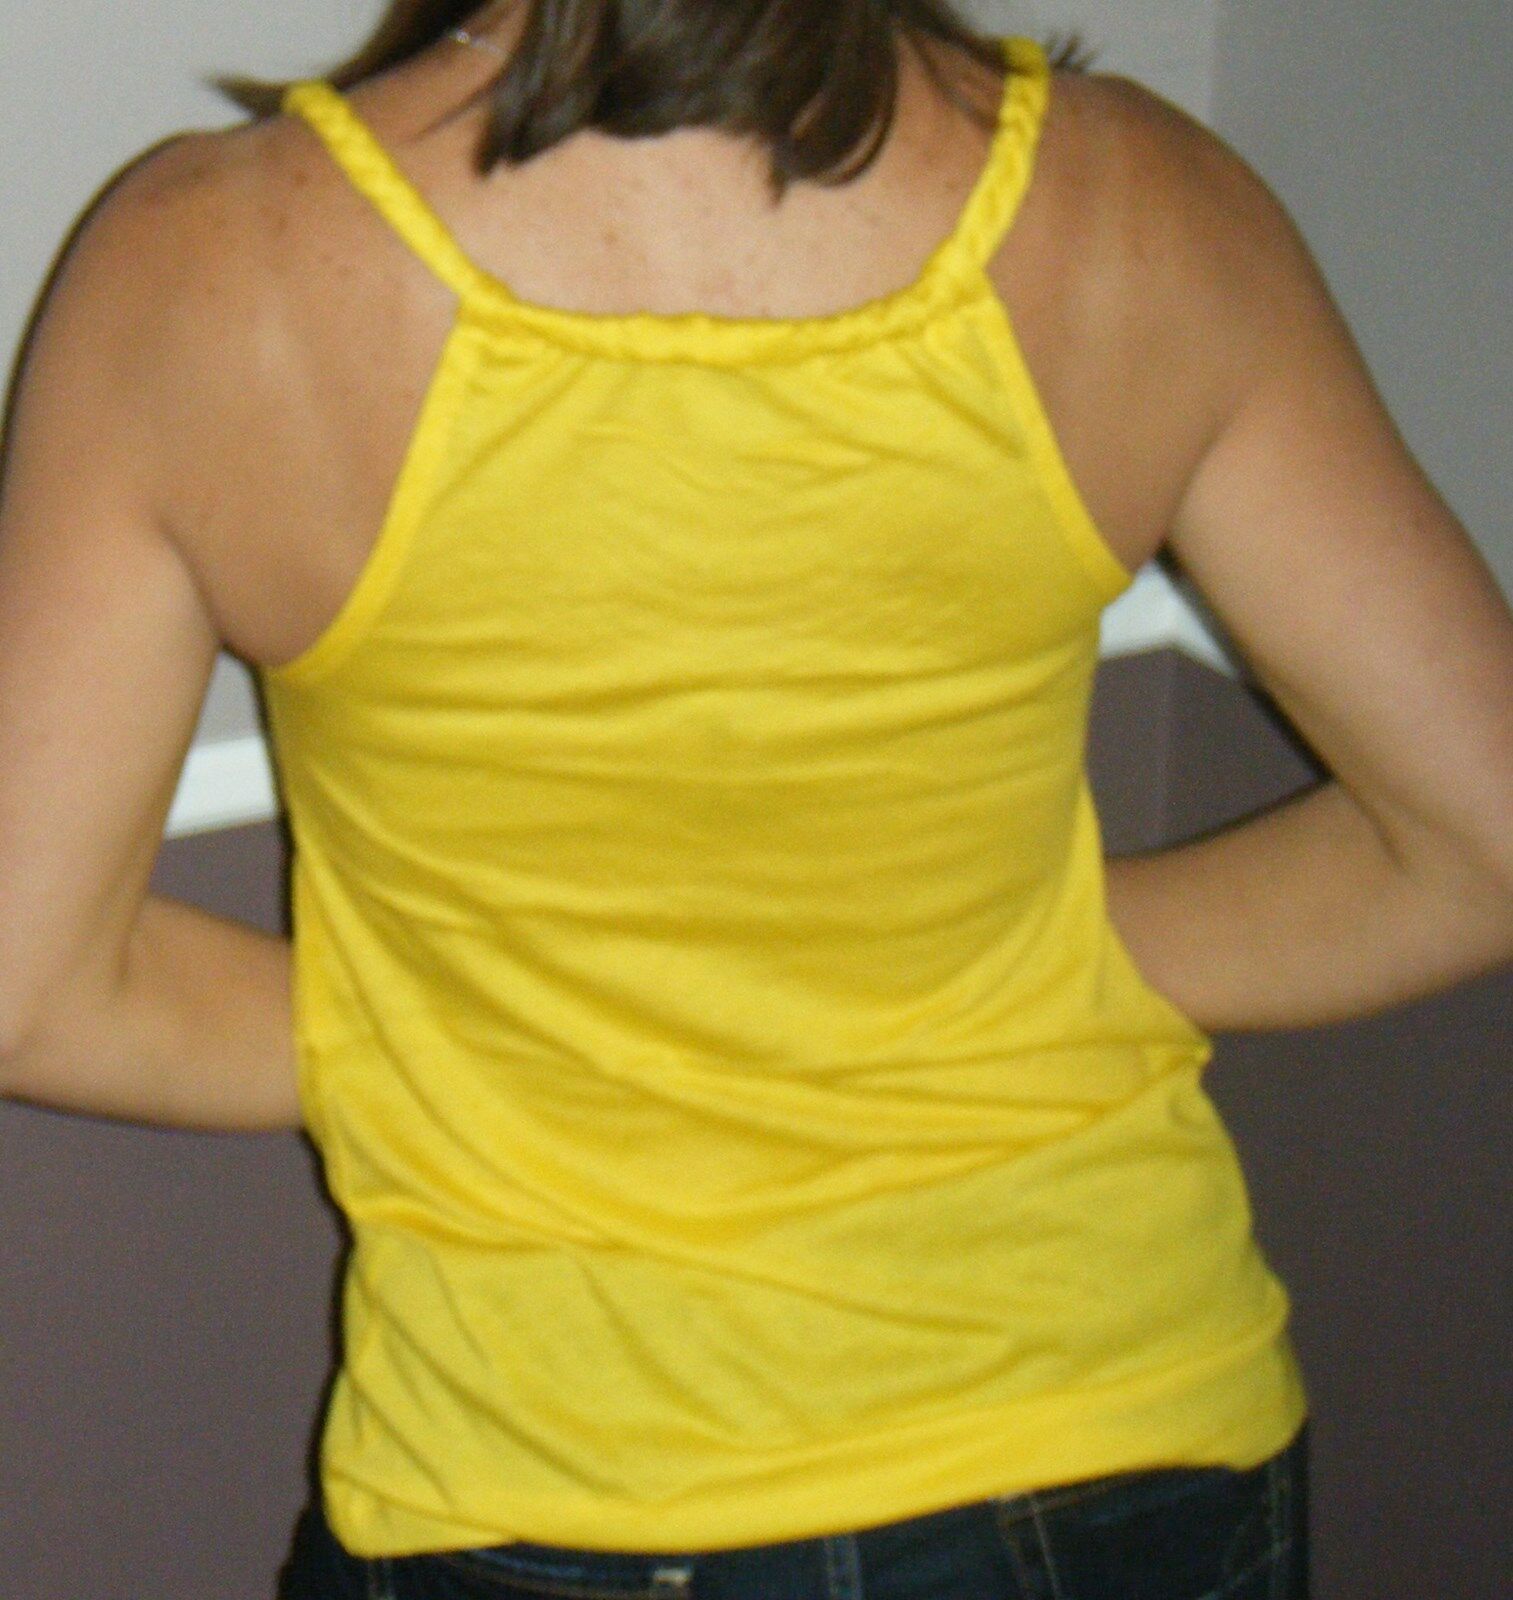 Very Sexy Low Cut Scoop Neck Braided Spaghetti Strap Tank Shirt Top Yellow S/M/L